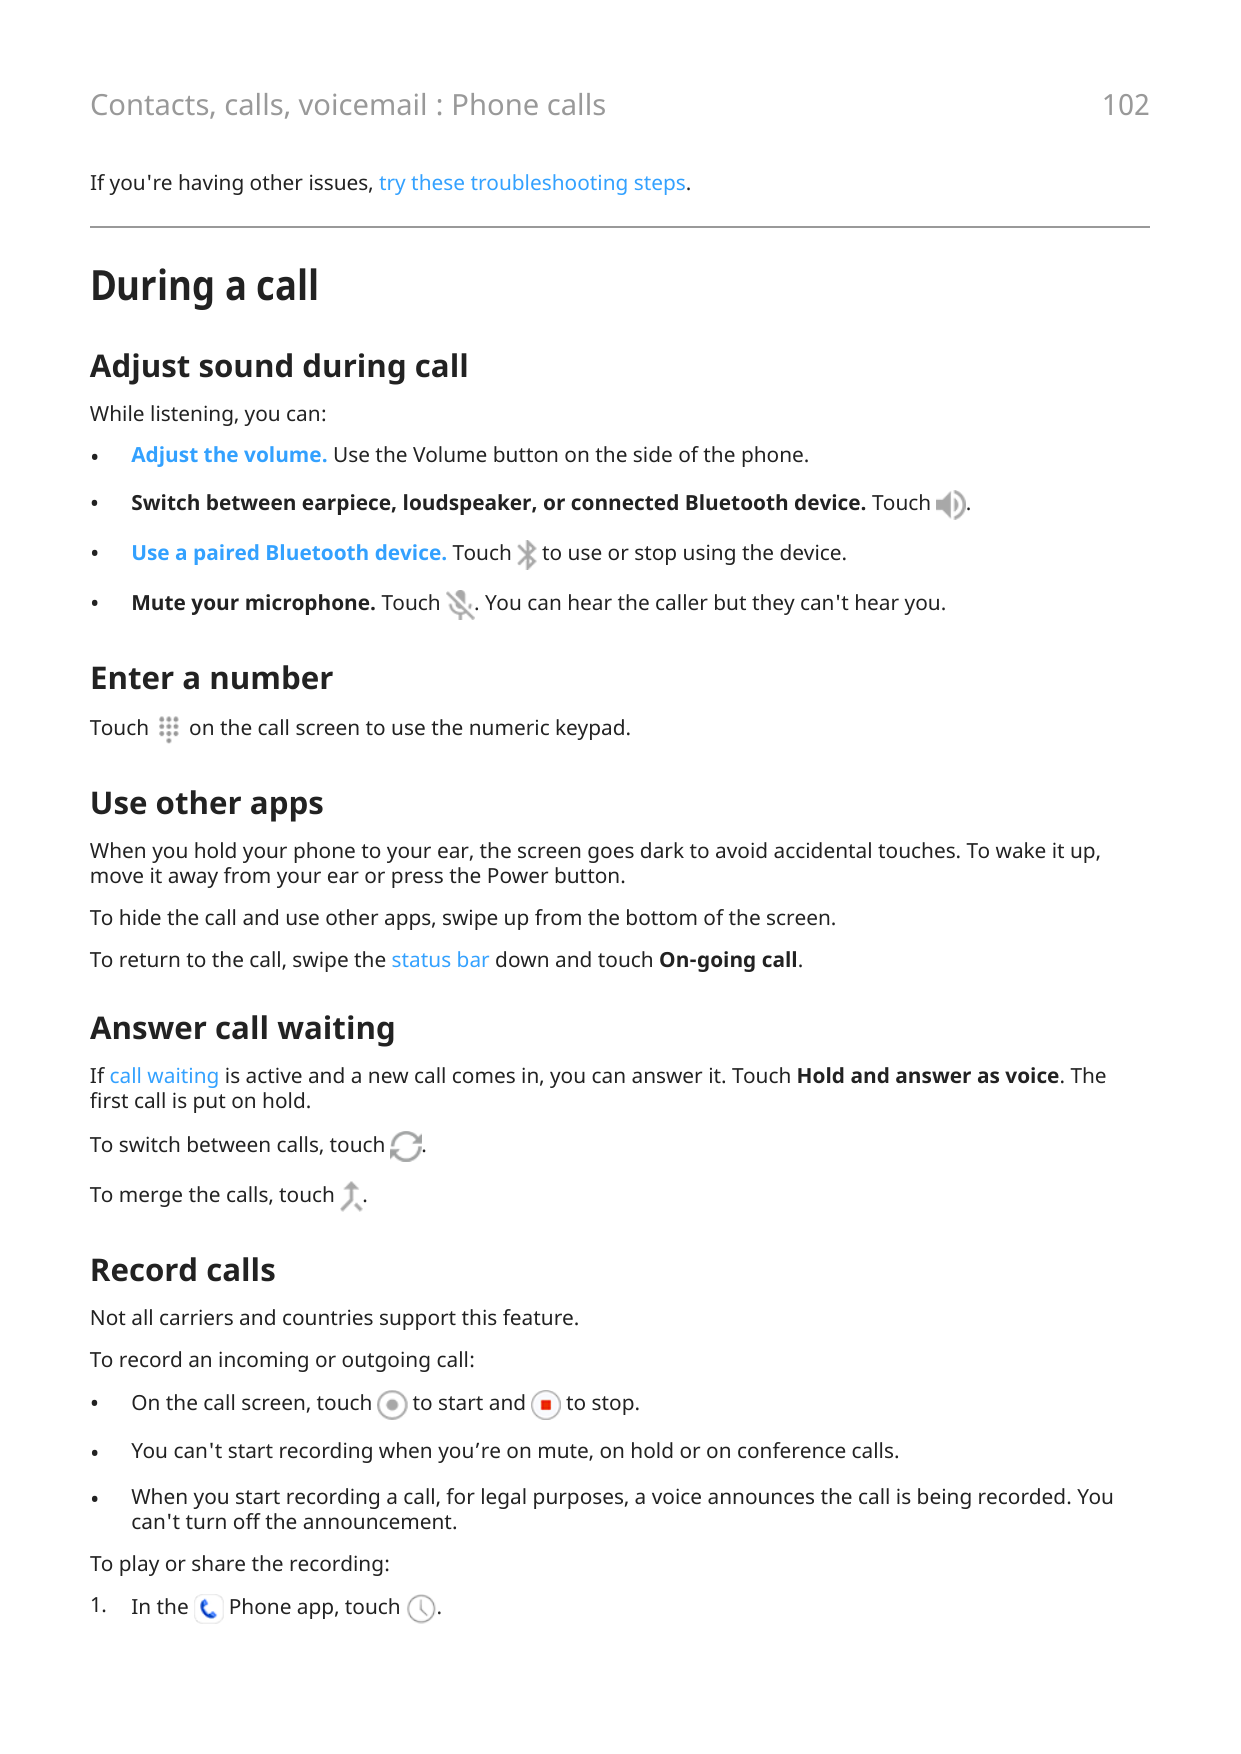 102Contacts, calls, voicemail : Phone callsIf you're having other issues, try these troubleshooting steps.During a callAdjust so